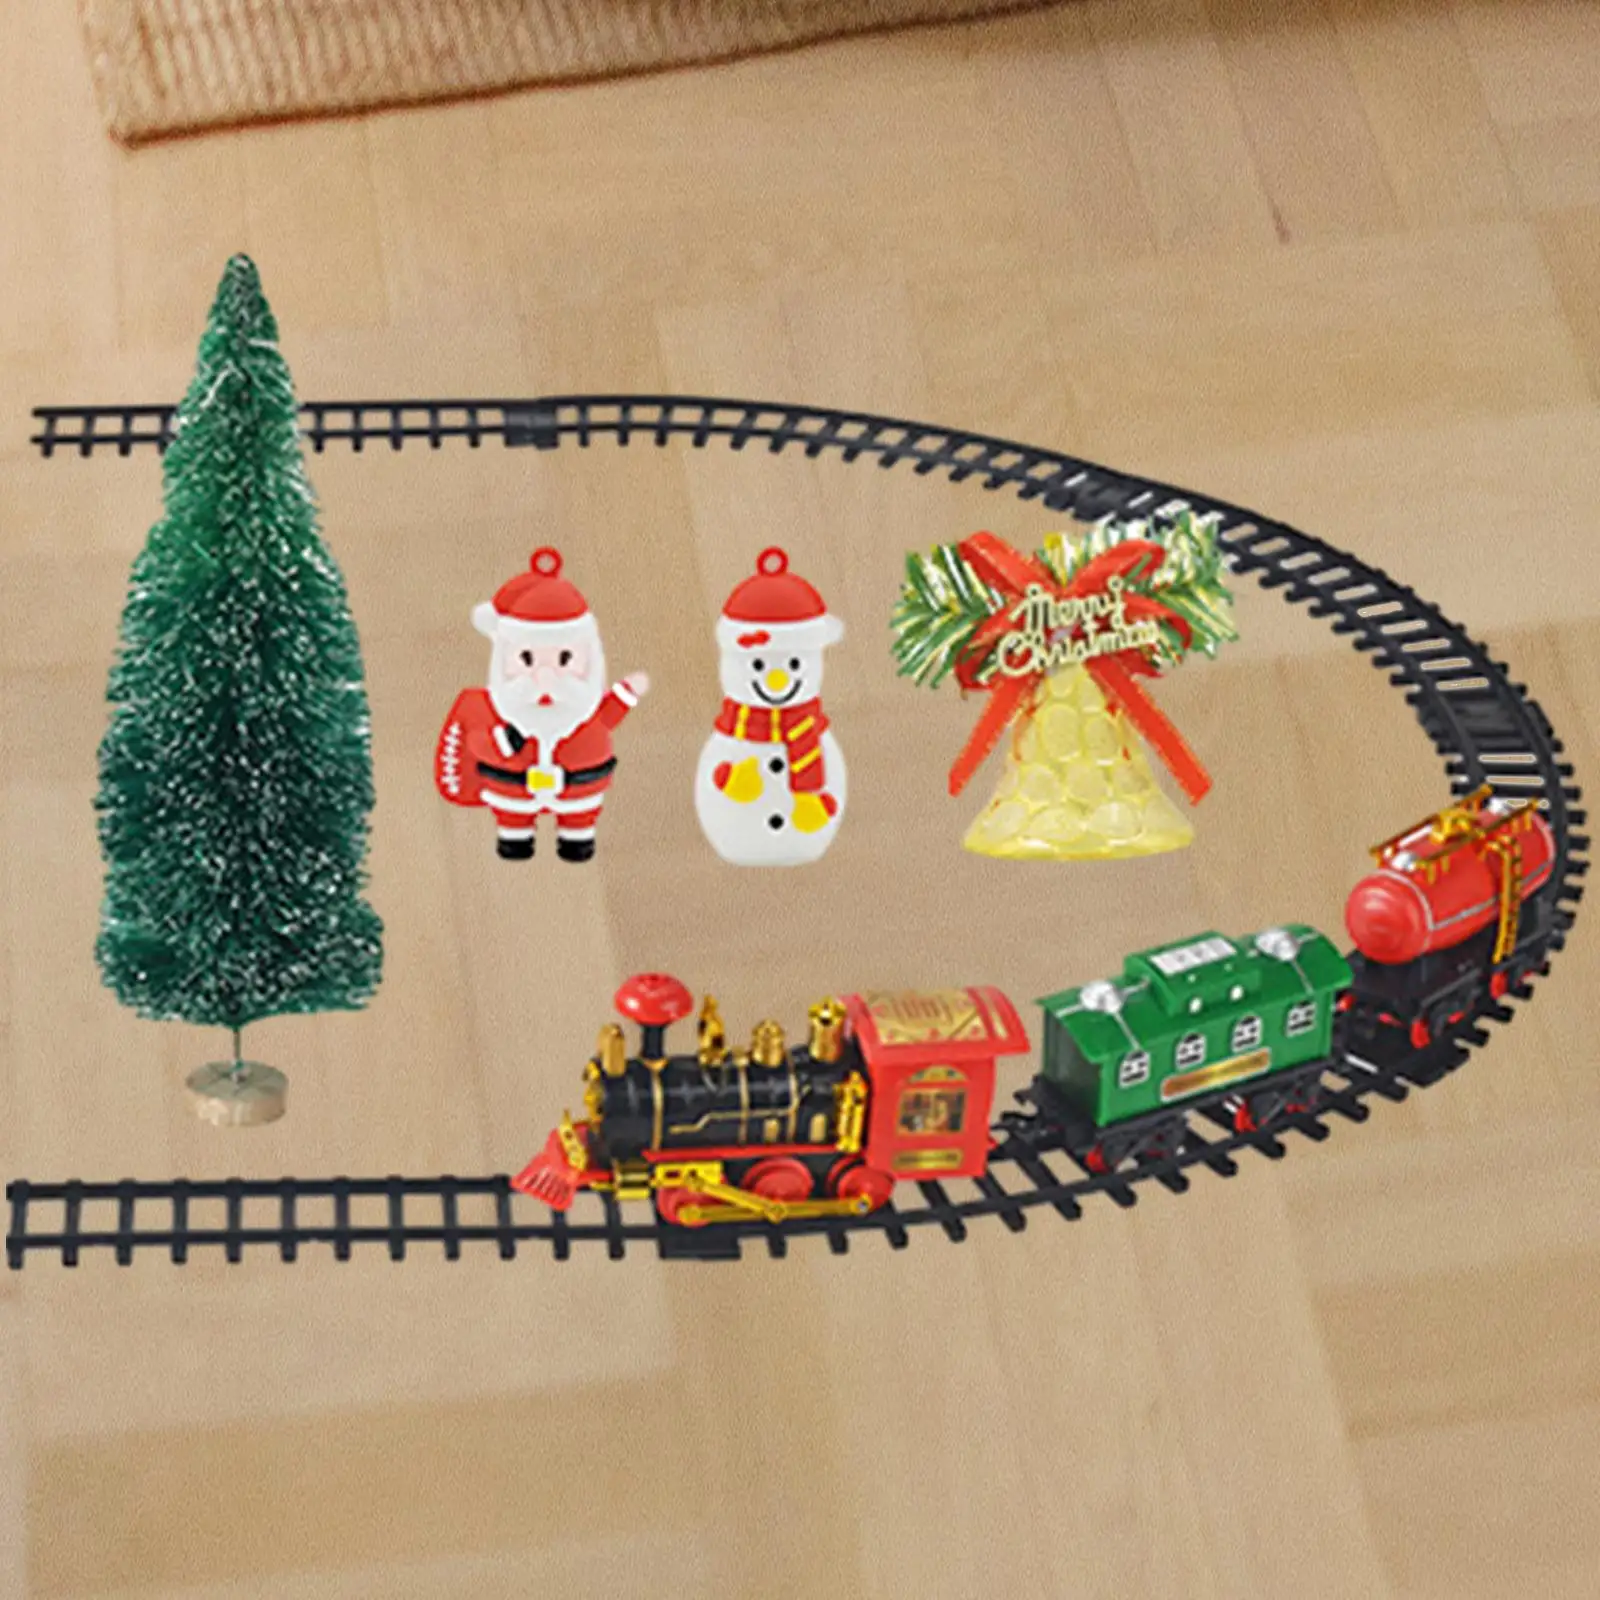 Electric Train Set Christmas Train Carriages Tracks Pendants Classical Train Toys Electric Train Tracks for Girls Children Gifts